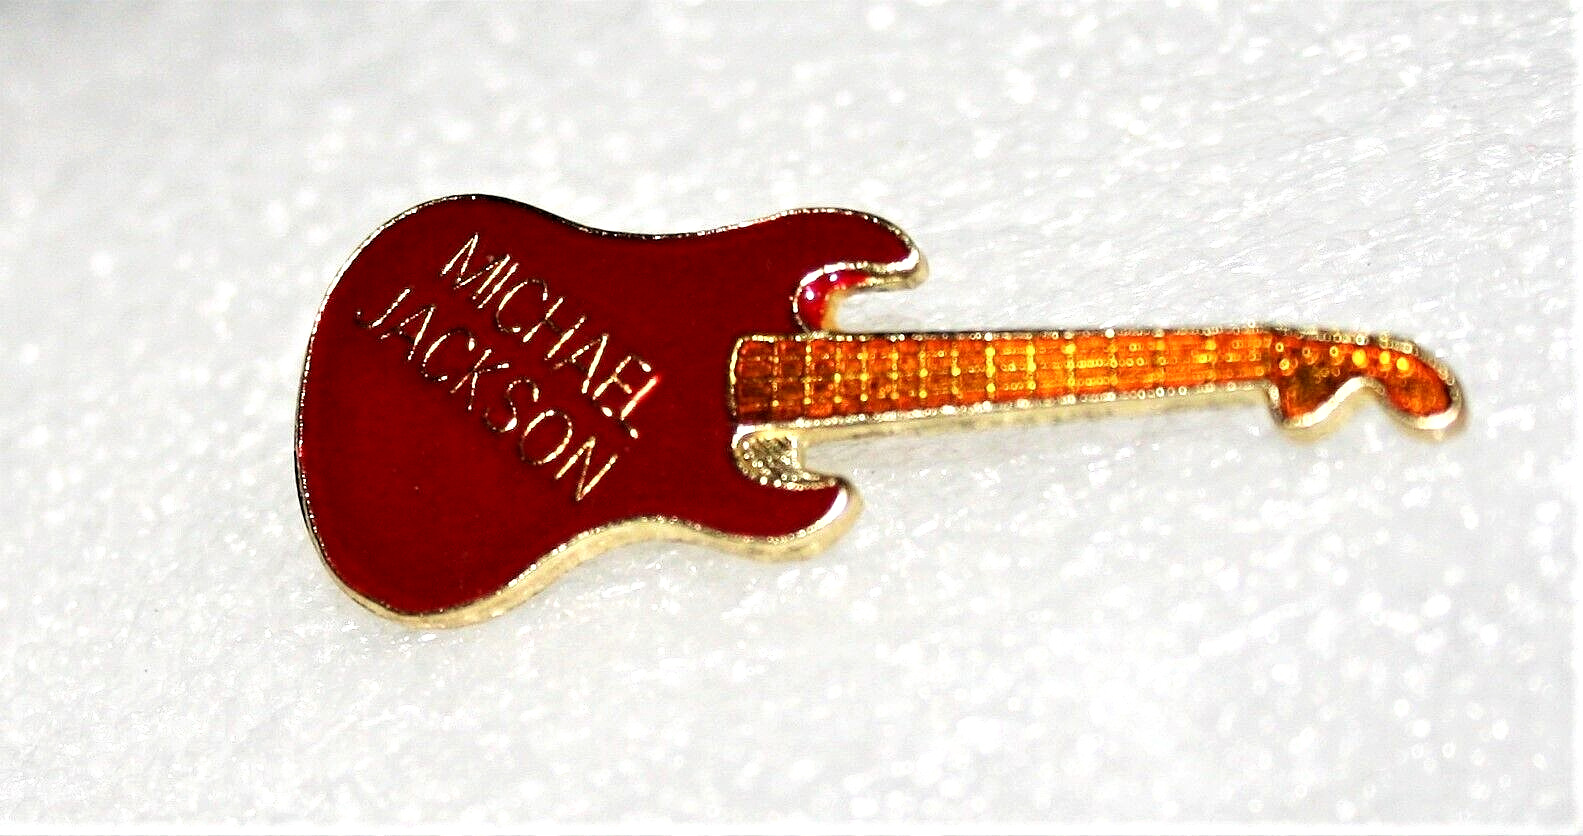 Vtg Michael Jackson Red Guitar Pop Music Group Band Pin Button 1980s New NOS 